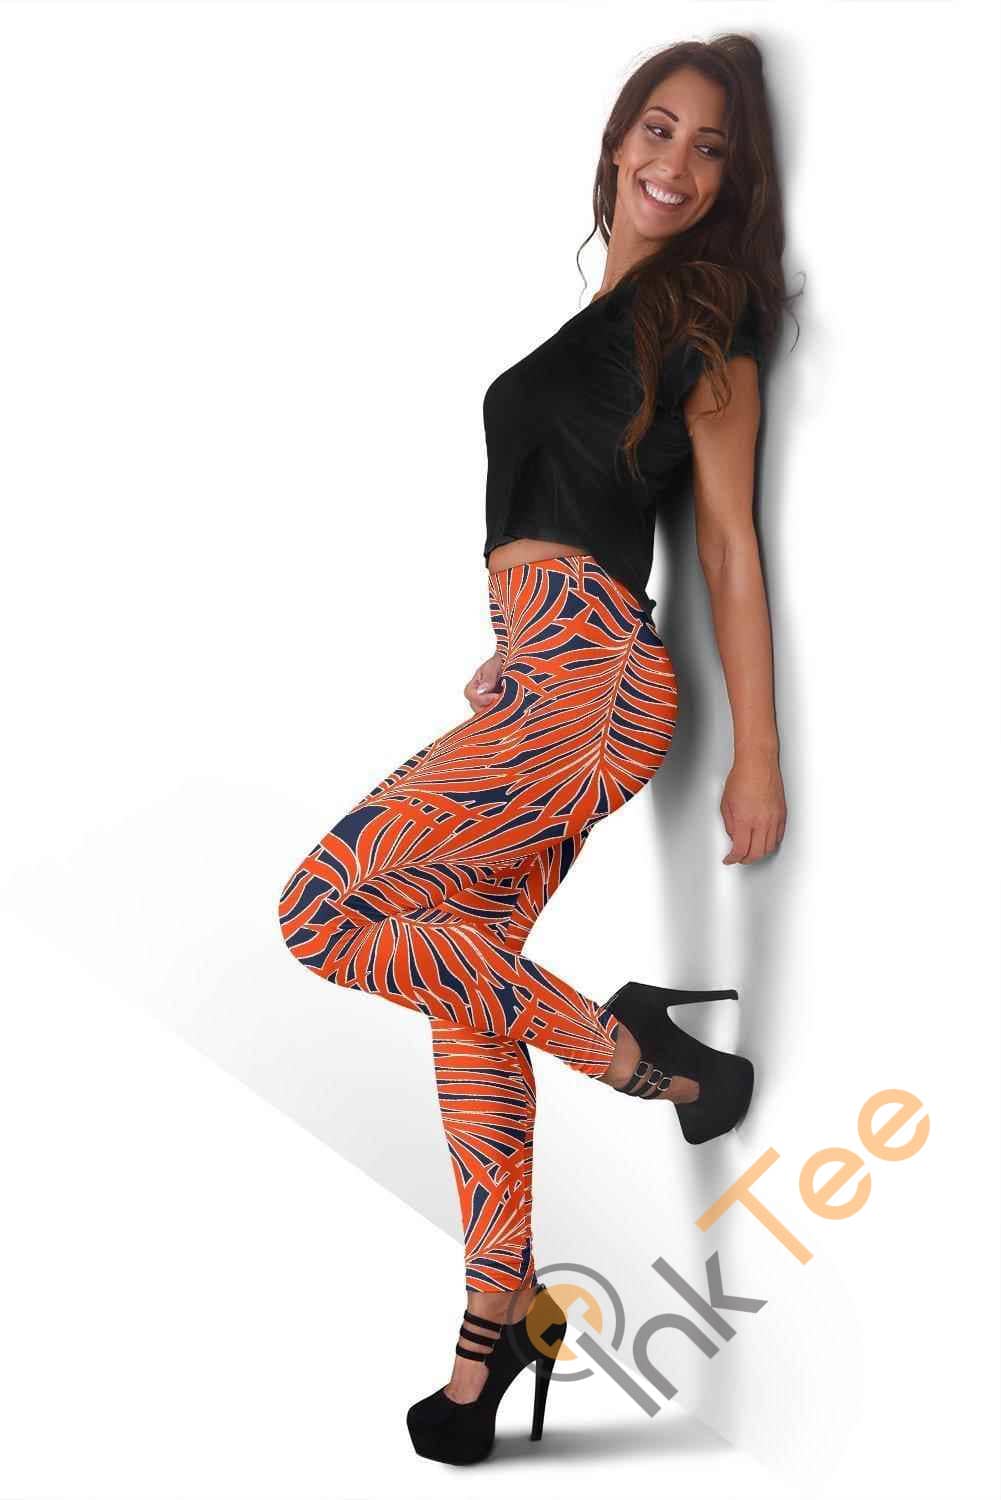 Inktee Store - Virginia Cavaliers Fans 3D All Over Print For Yoga Fitness Women'S Leggings Image